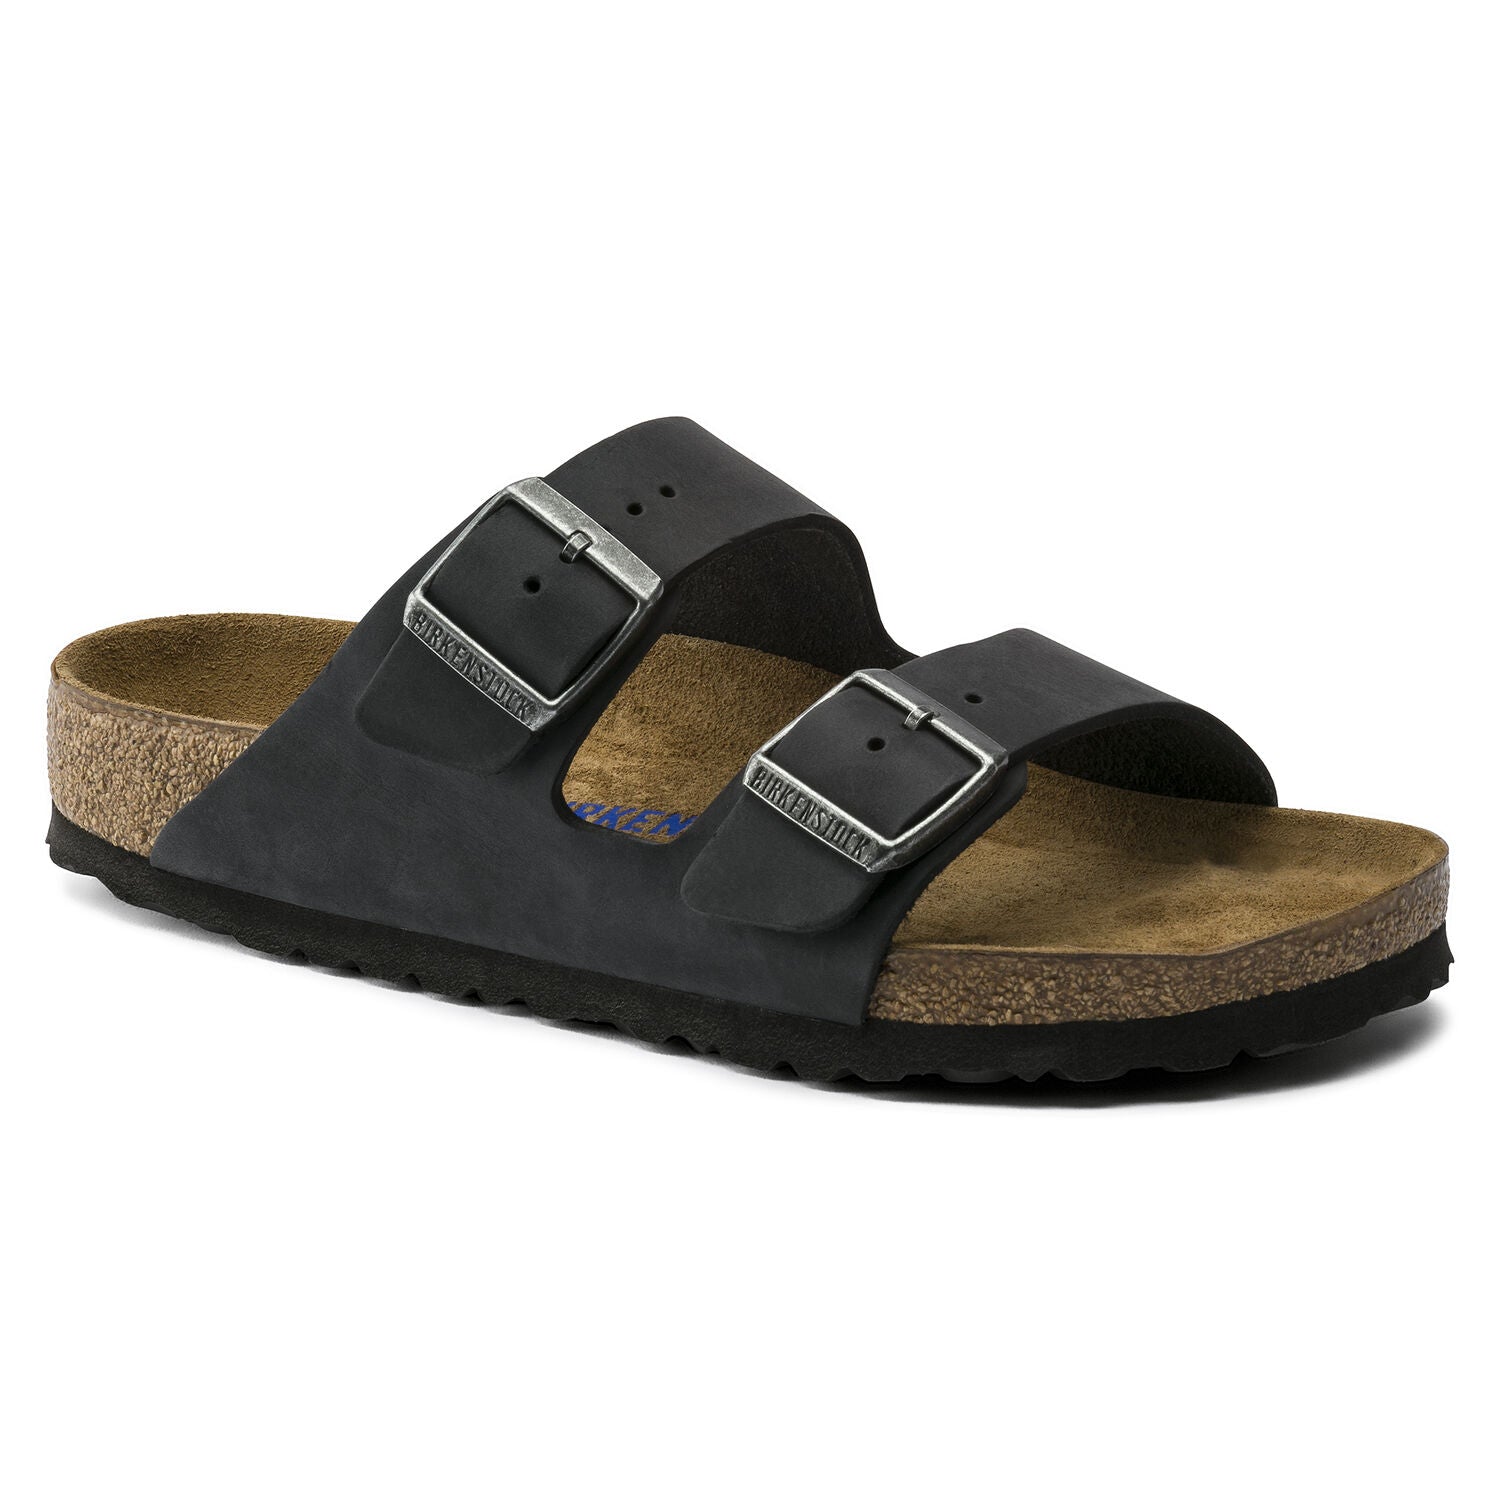 Birkenstock Arizona with soft footbed and oiled leather upper. Color is black.